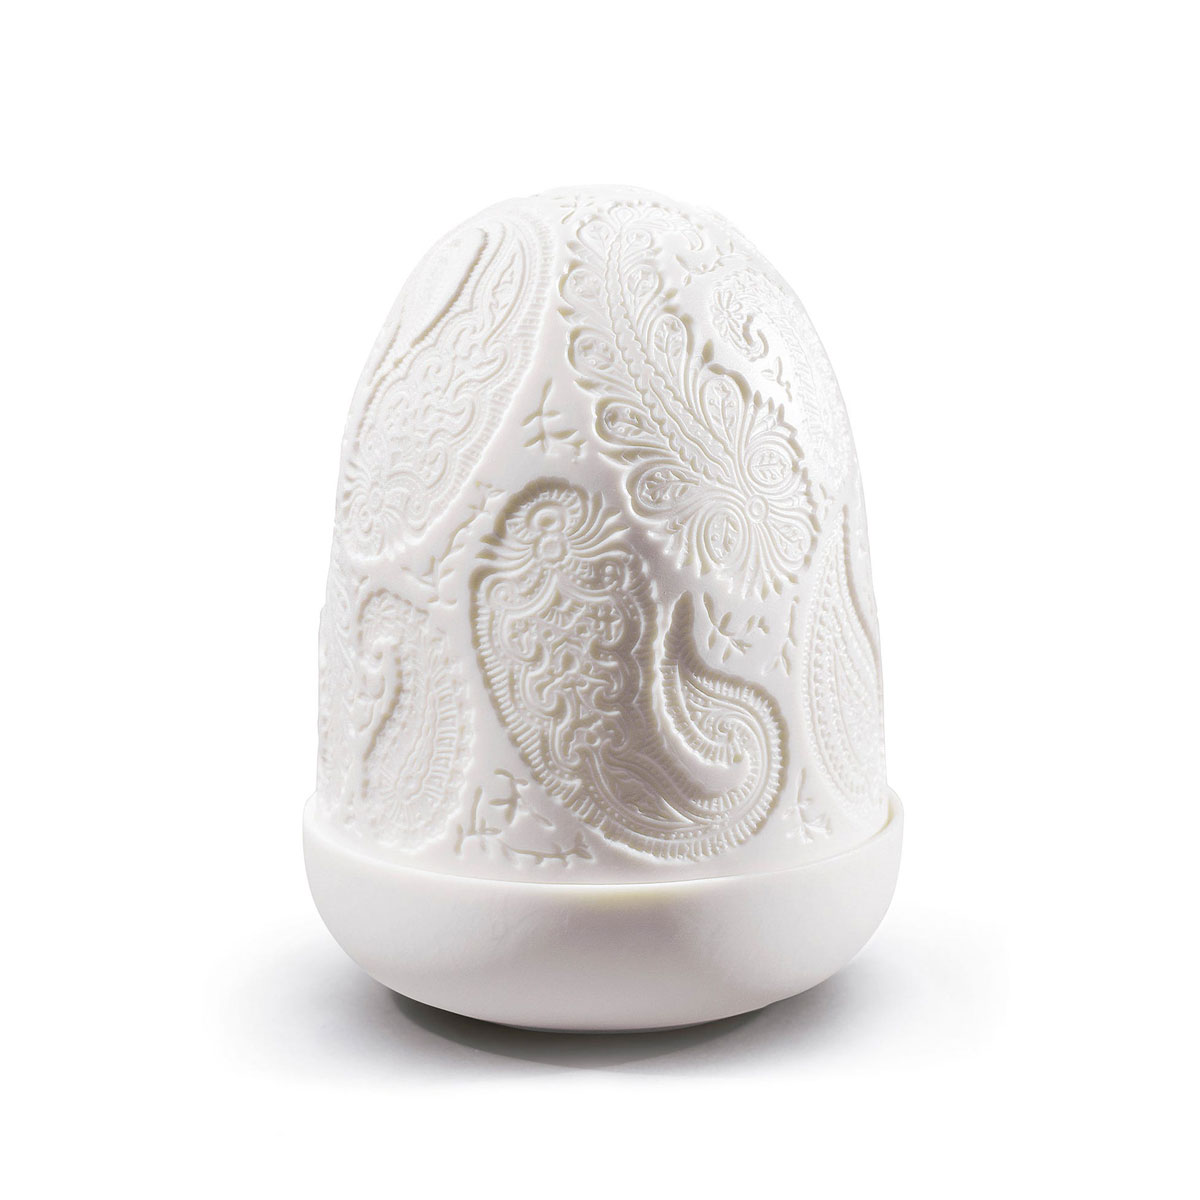 Lladro Light And Fragrance, Paisley Dome Table Lamp